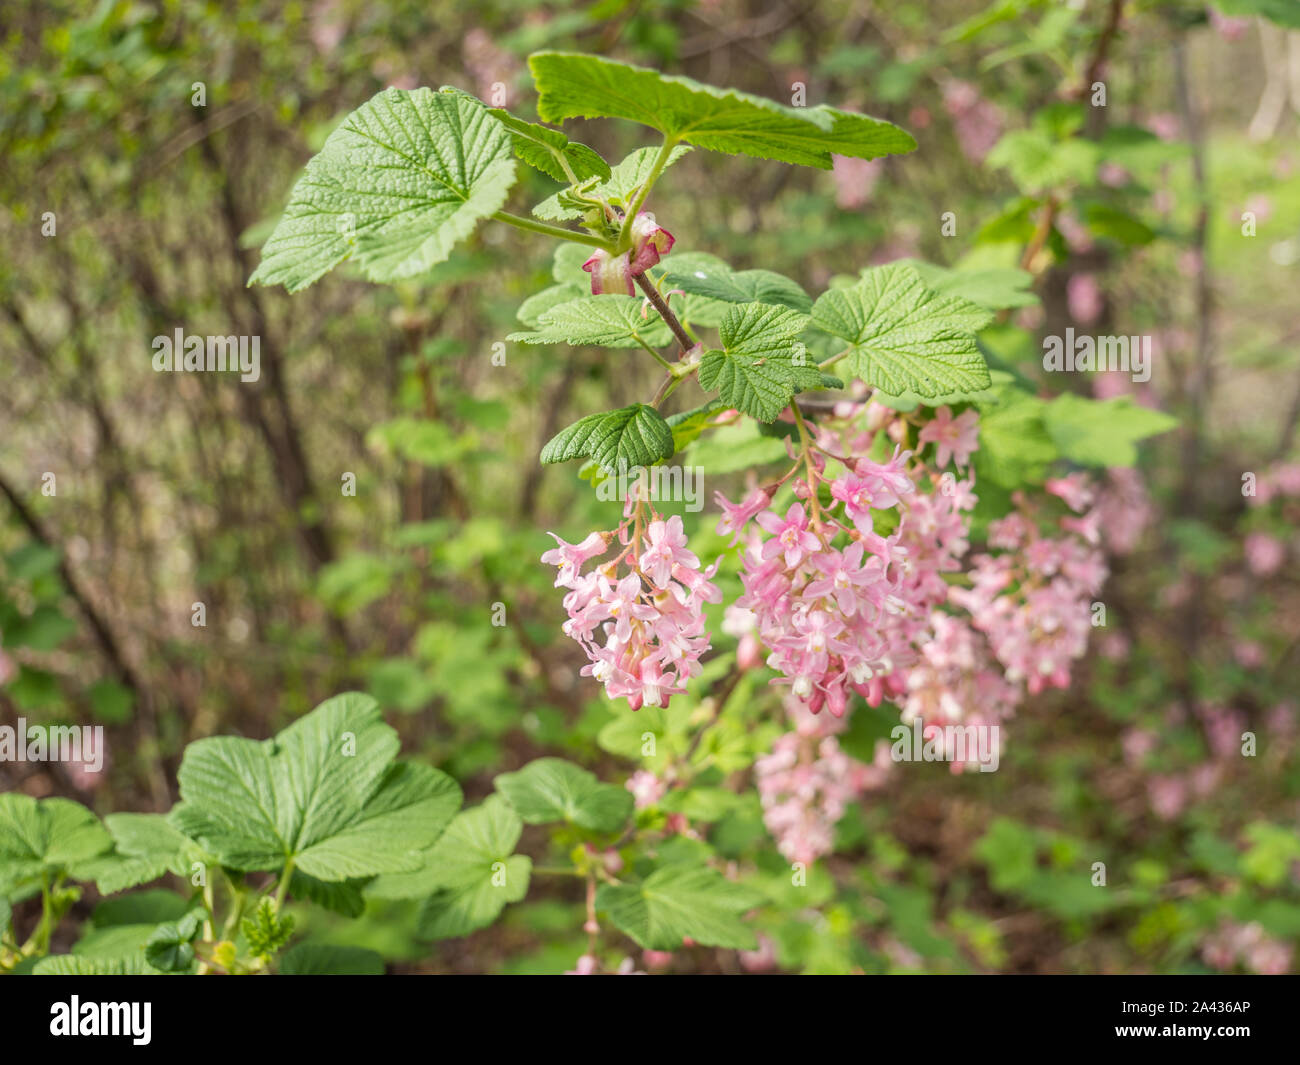 Blooming Bloodcurrant, Ribes sanguineum Stock Photo